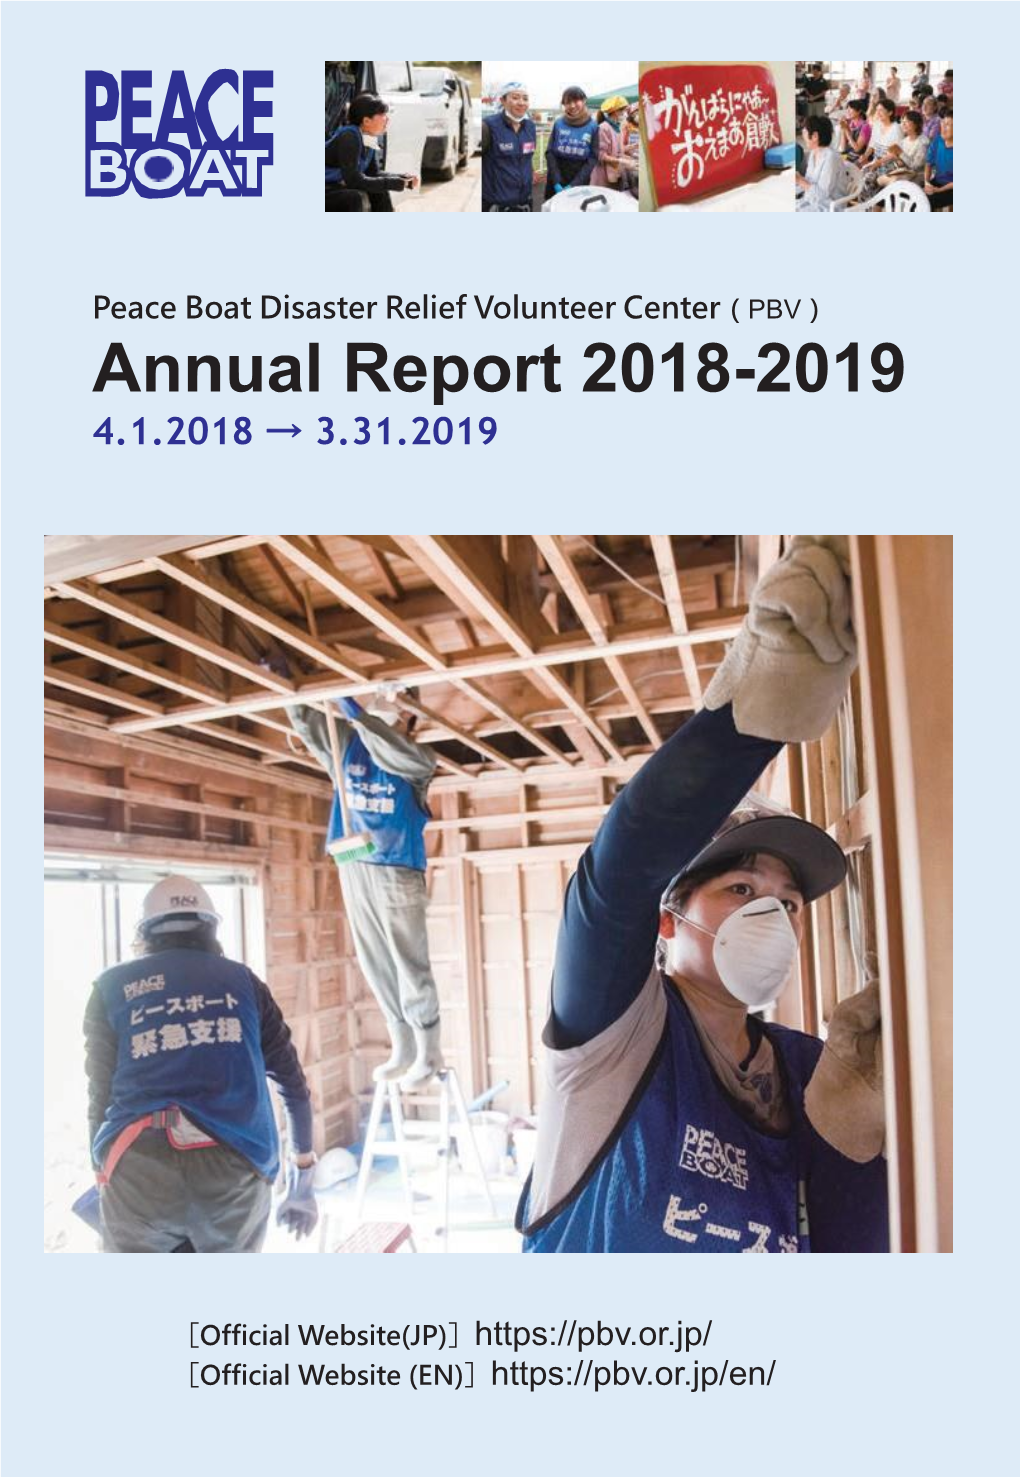 Peace Boat Disaster Relief Volunteer Center (PBV) Annual Report